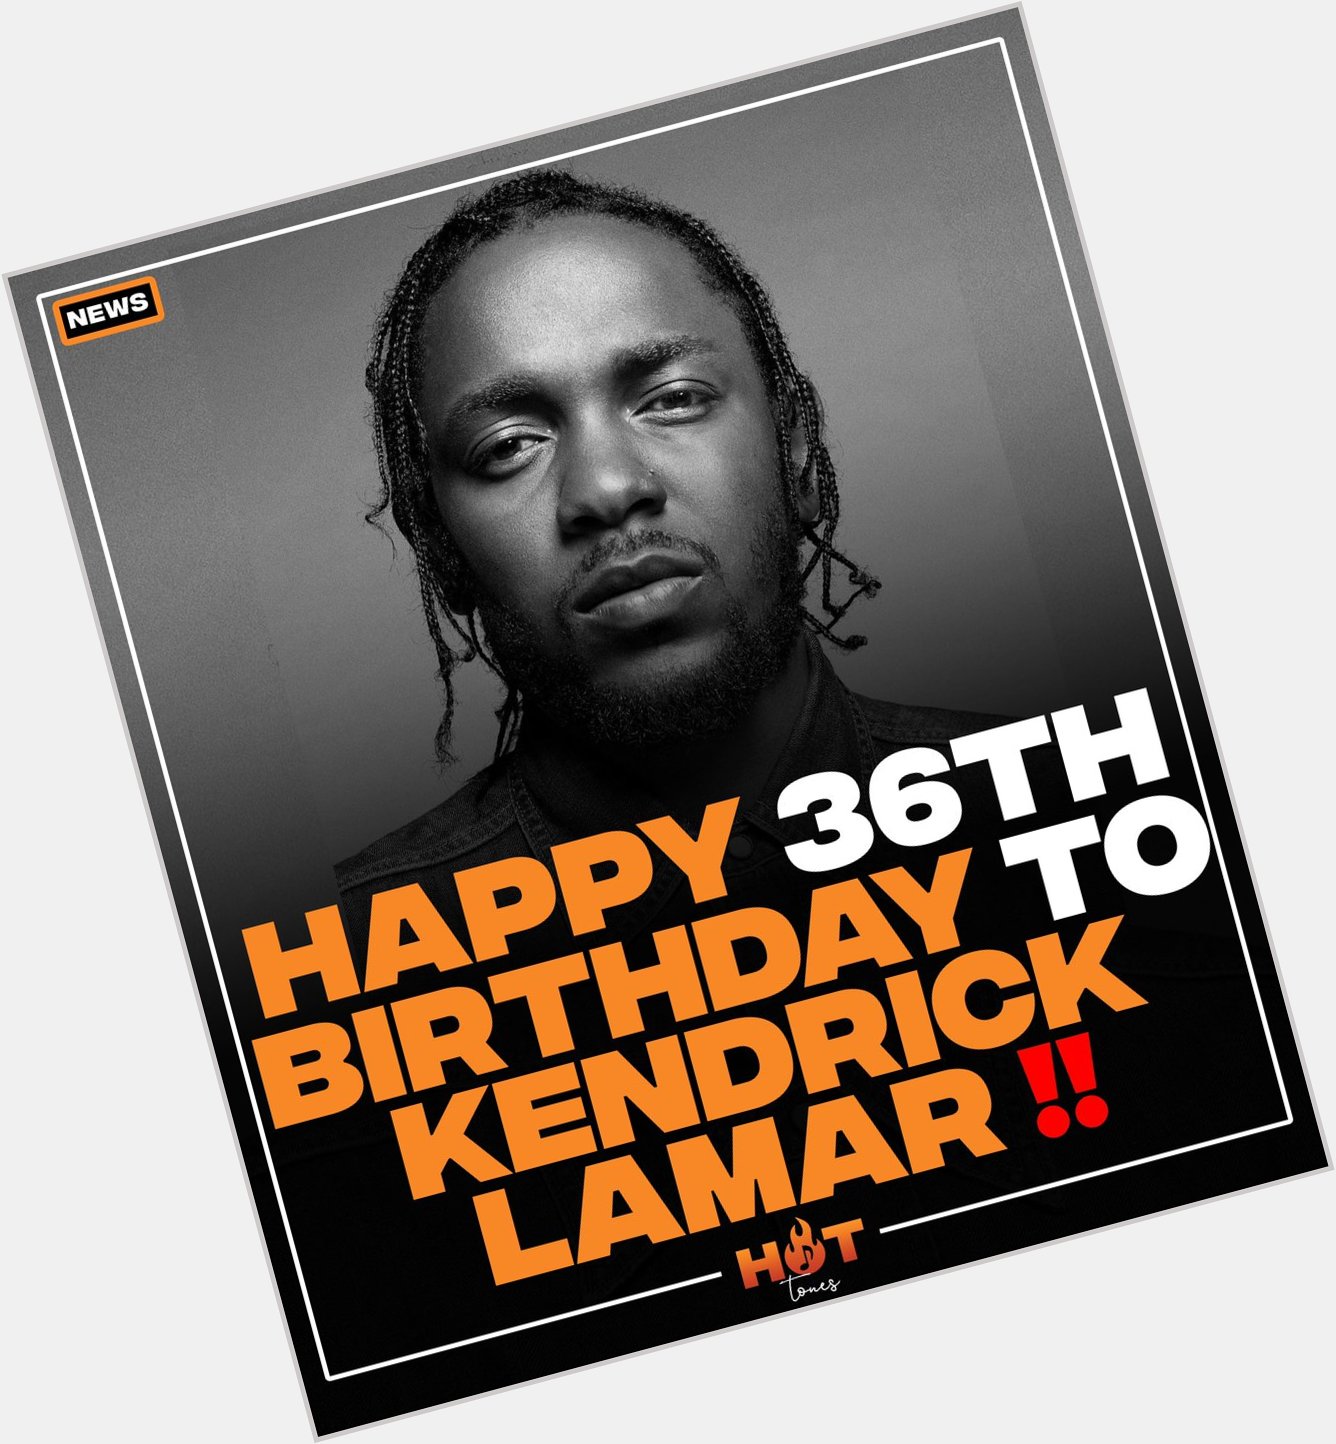 Happy 36th birthday to Kendrick Lamar  Favorite song from him  